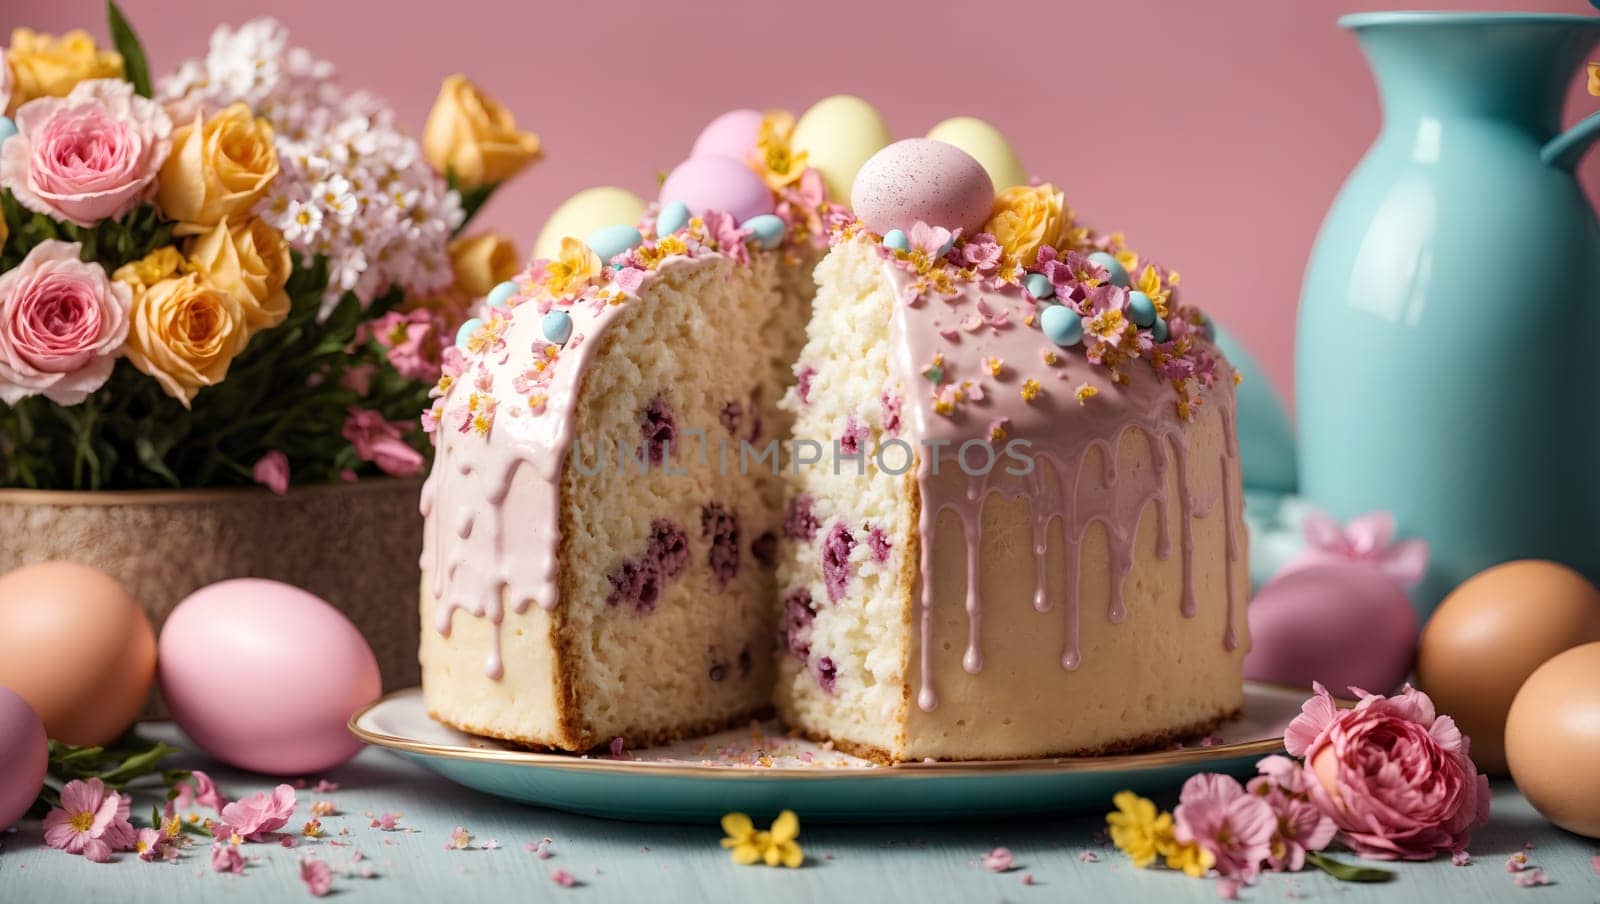 Multicolored Easter cake with Easter eggs and flowers on a pink background